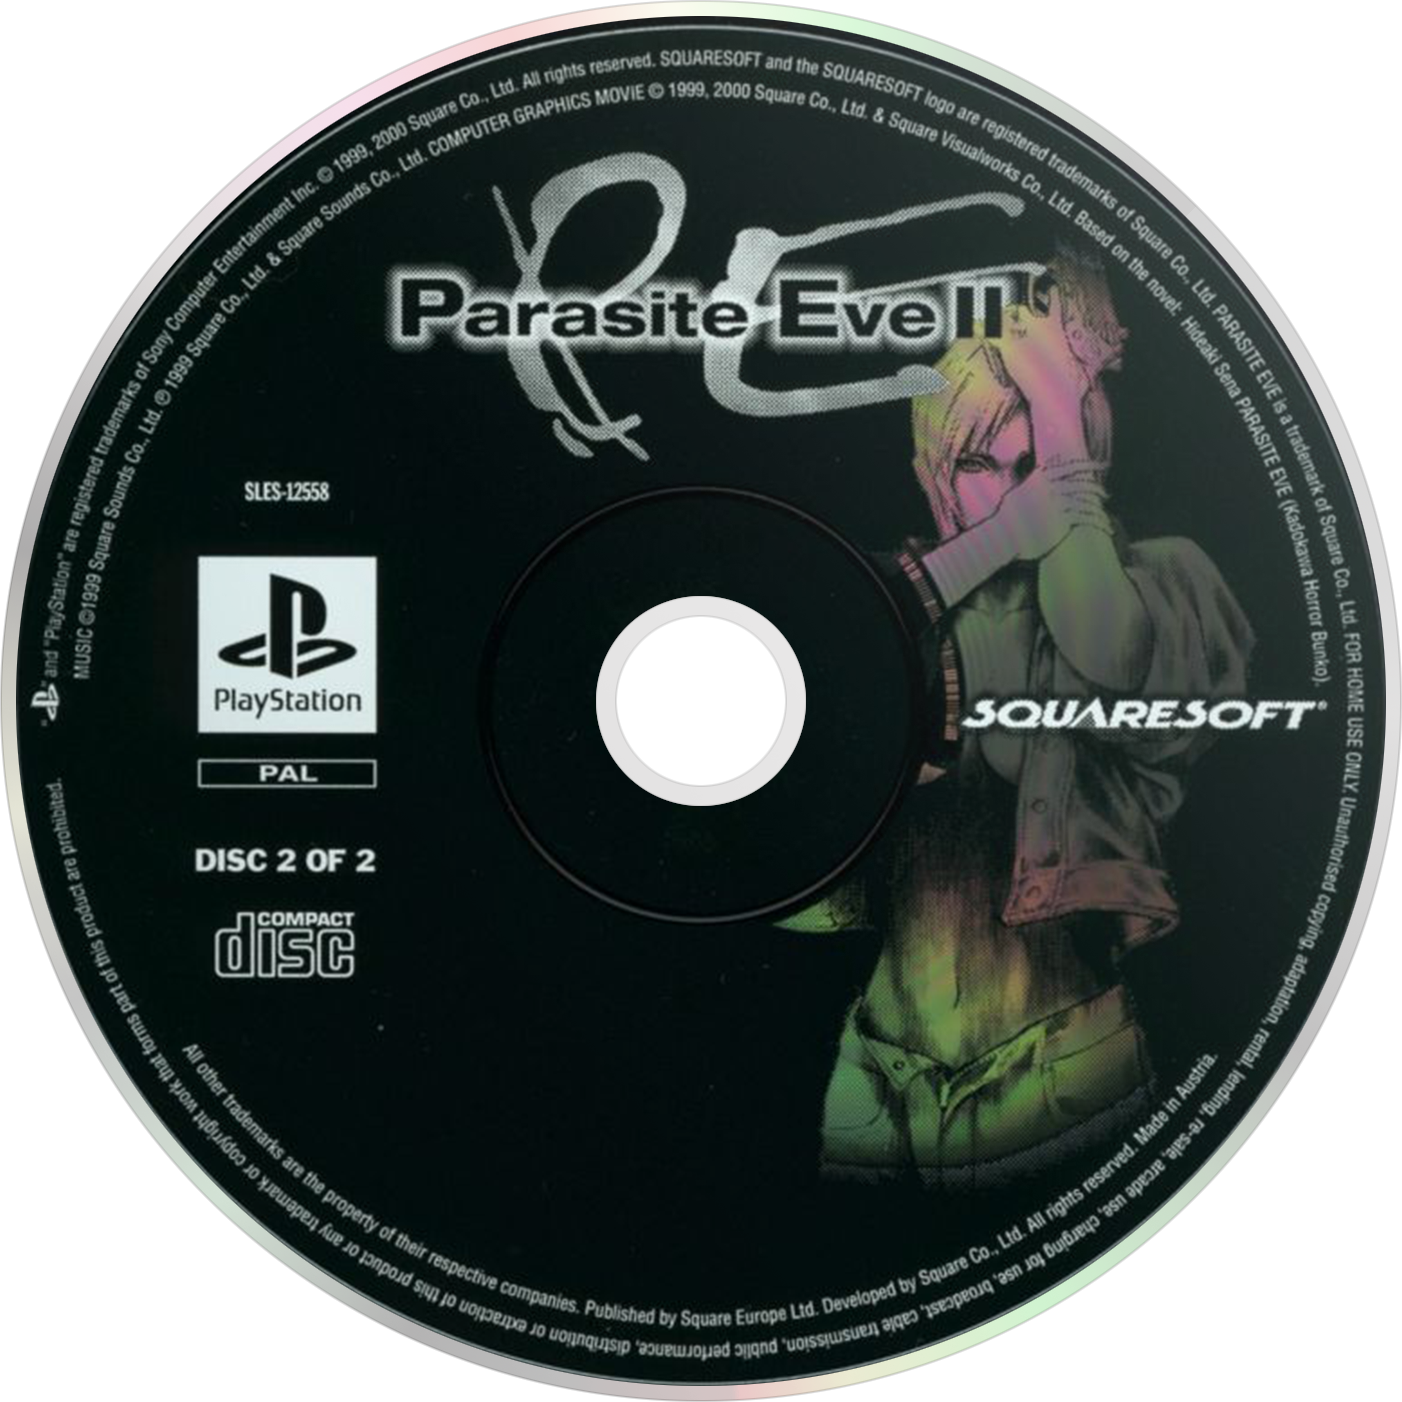 Parasite Eve II official promotional image - MobyGames